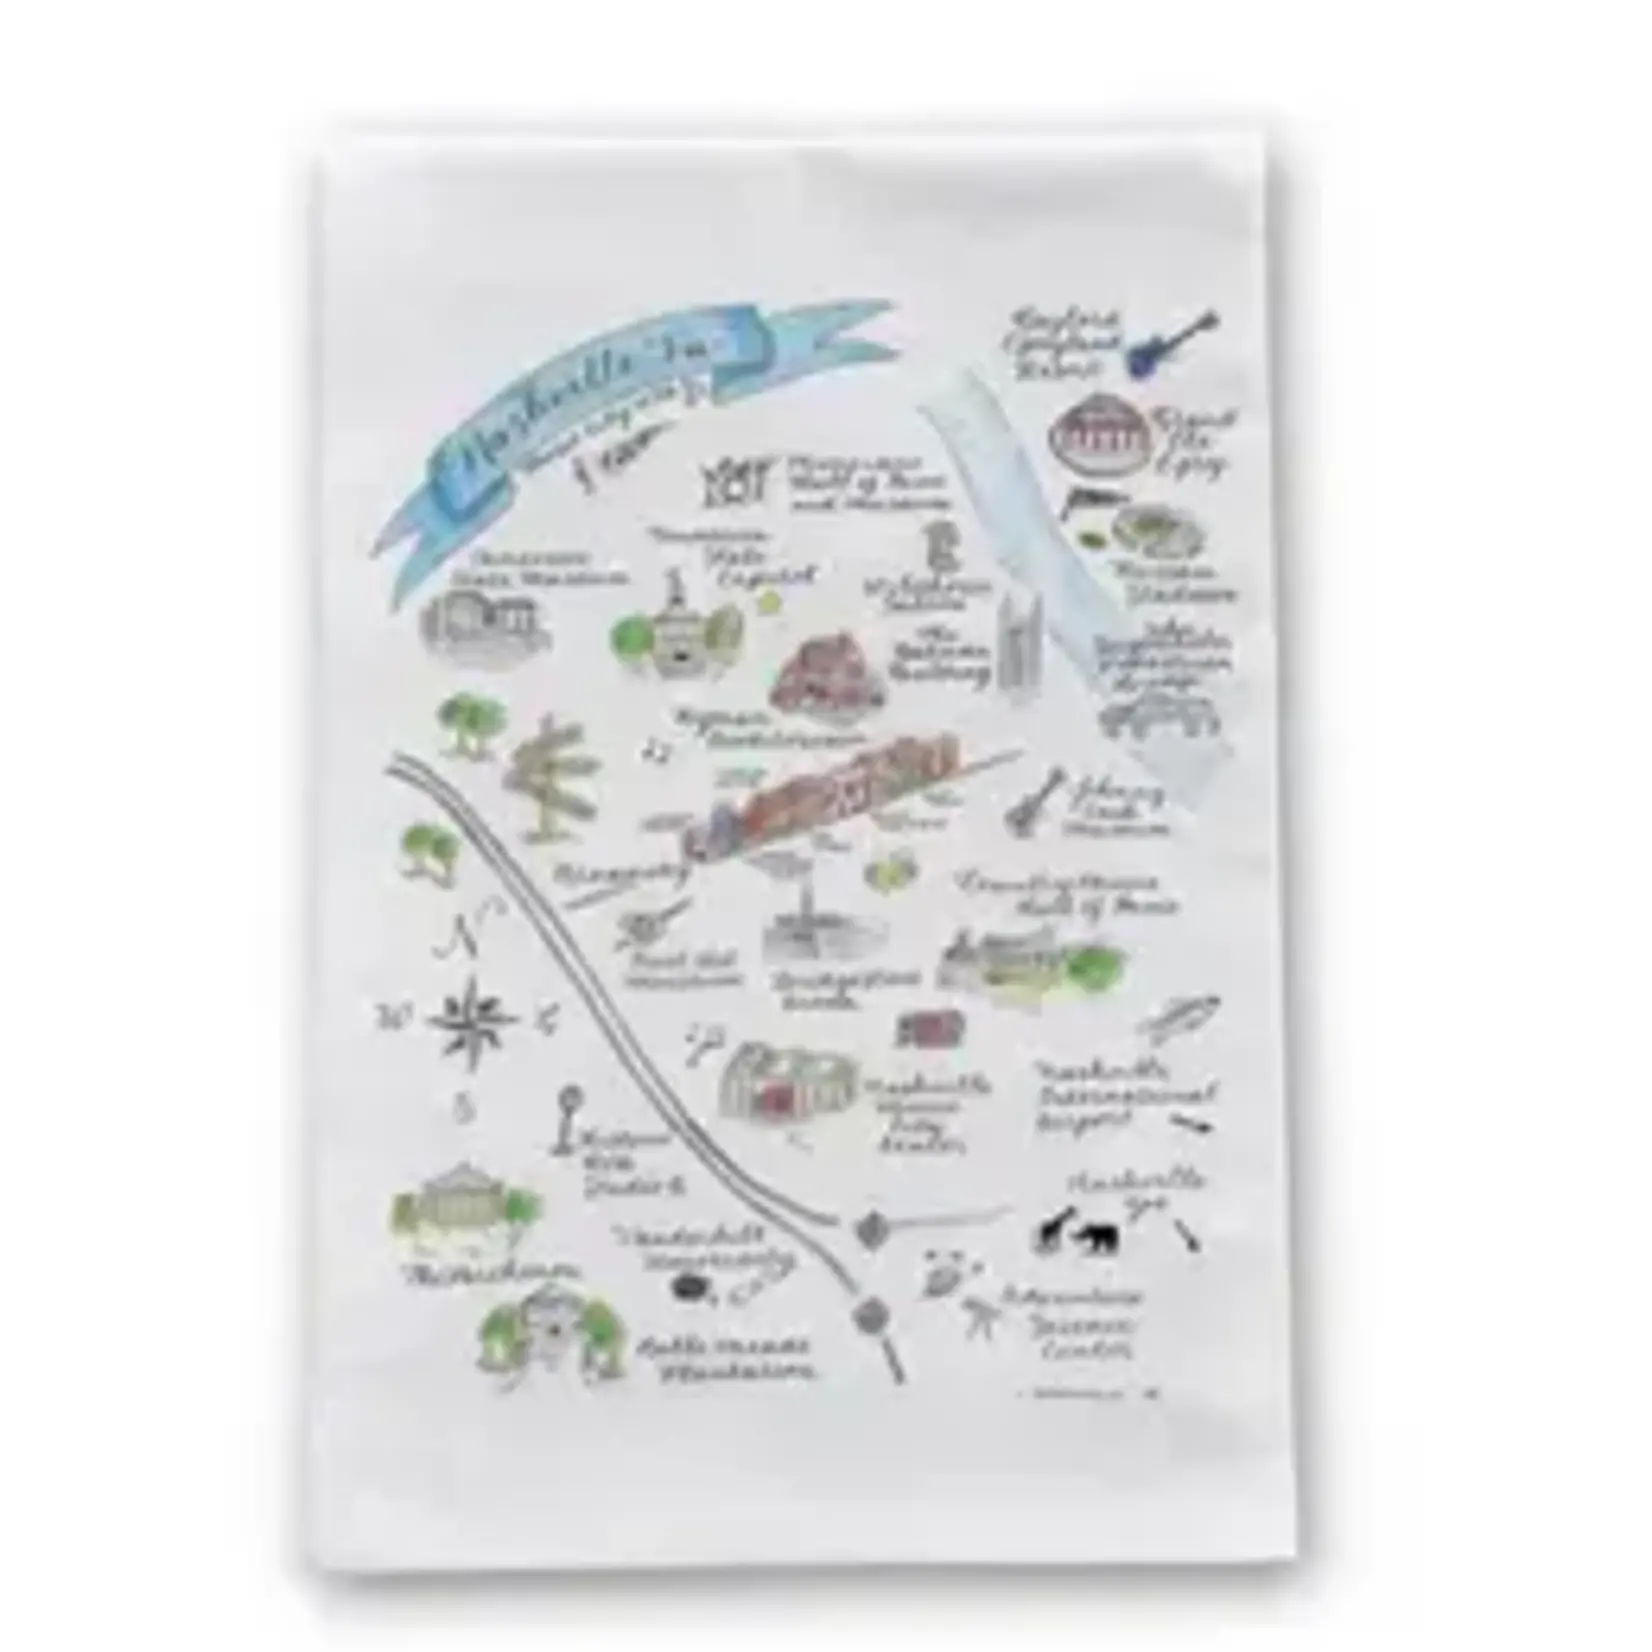 The Write Occassion Calligraphy Nashville, TN Map Tea Towel